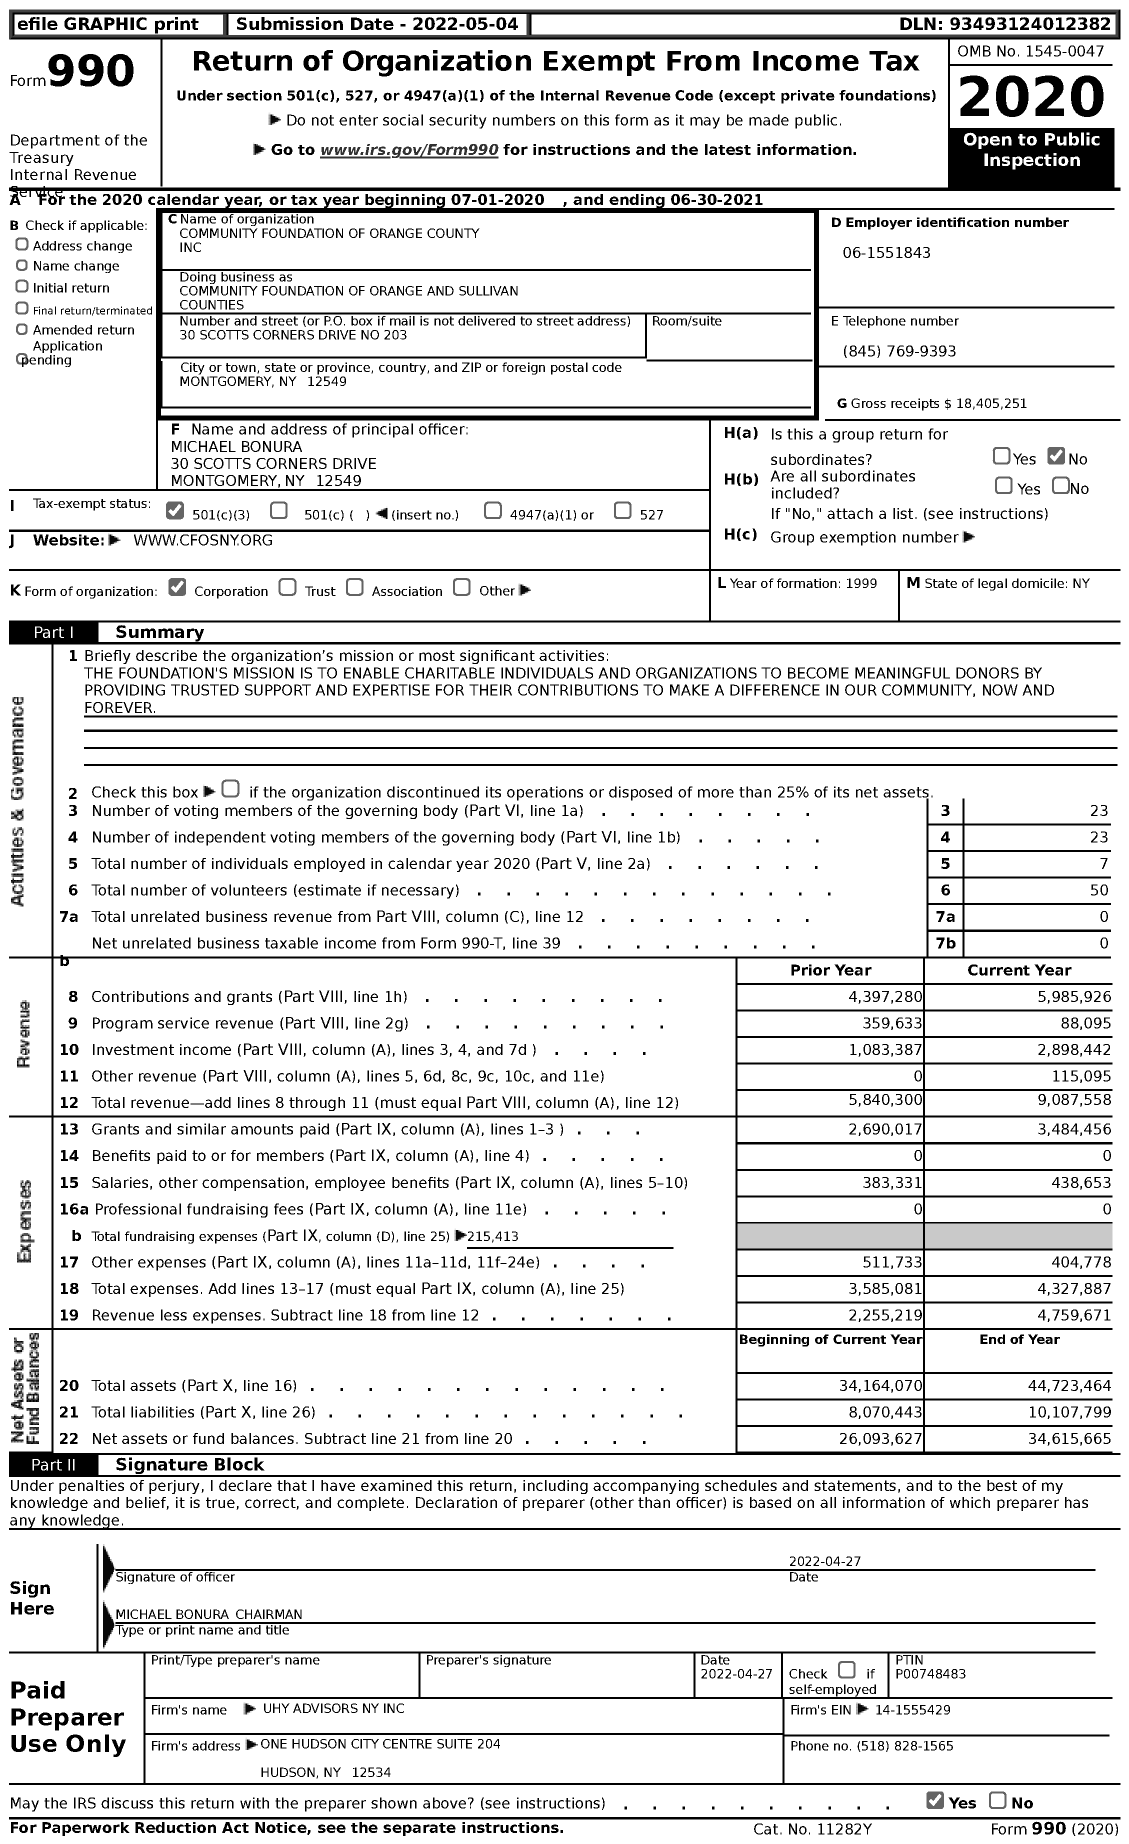 Image of first page of 2020 Form 990 for Community Foundation of Orange and Sullivan Counties (CFOS)